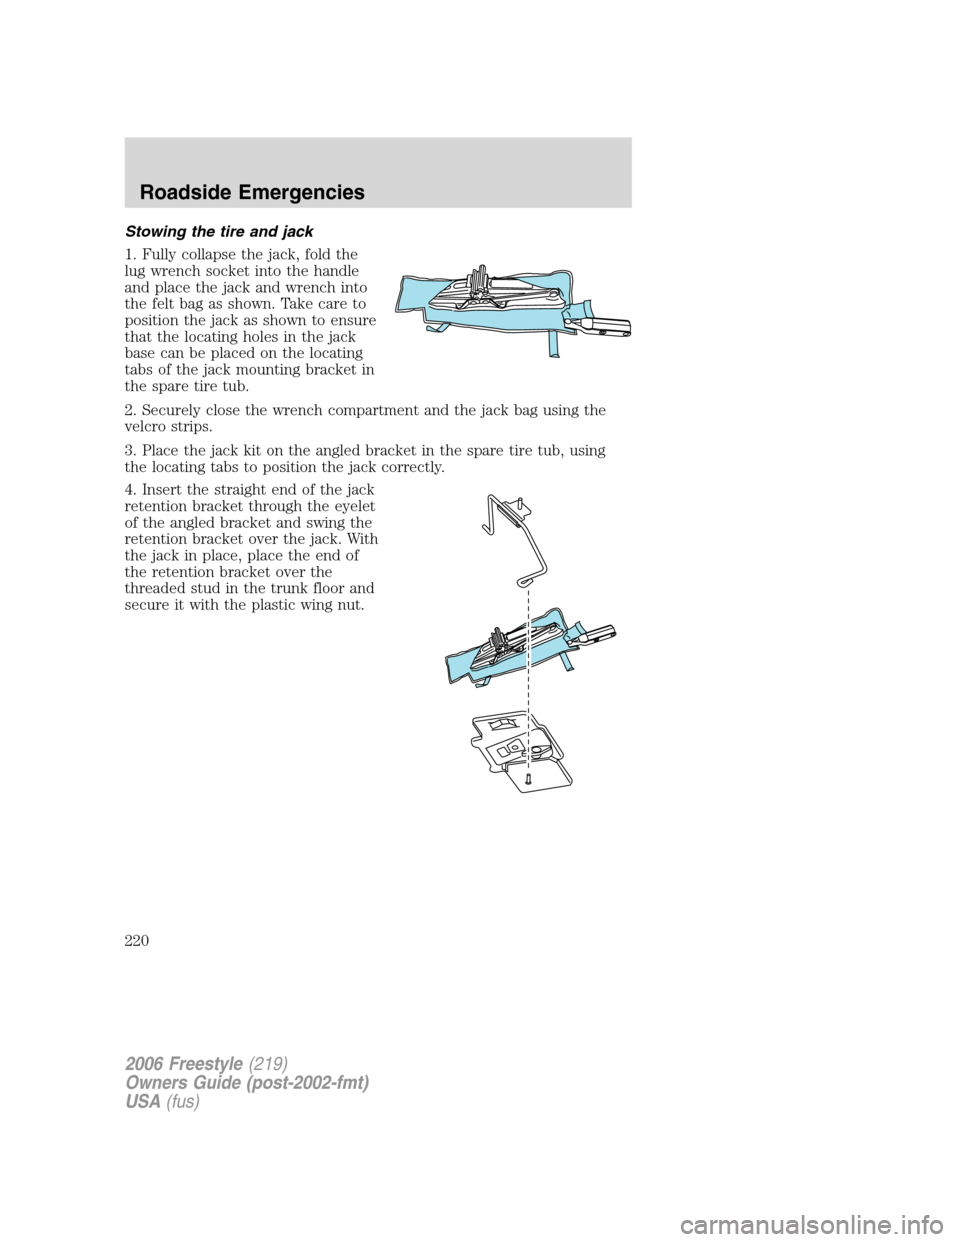 FORD FREESTYLE 2006 1.G Owners Manual Stowing the tire and jack
1. Fully collapse the jack, fold the
lug wrench socket into the handle
and place the jack and wrench into
the felt bag as shown. Take care to
position the jack as shown to en